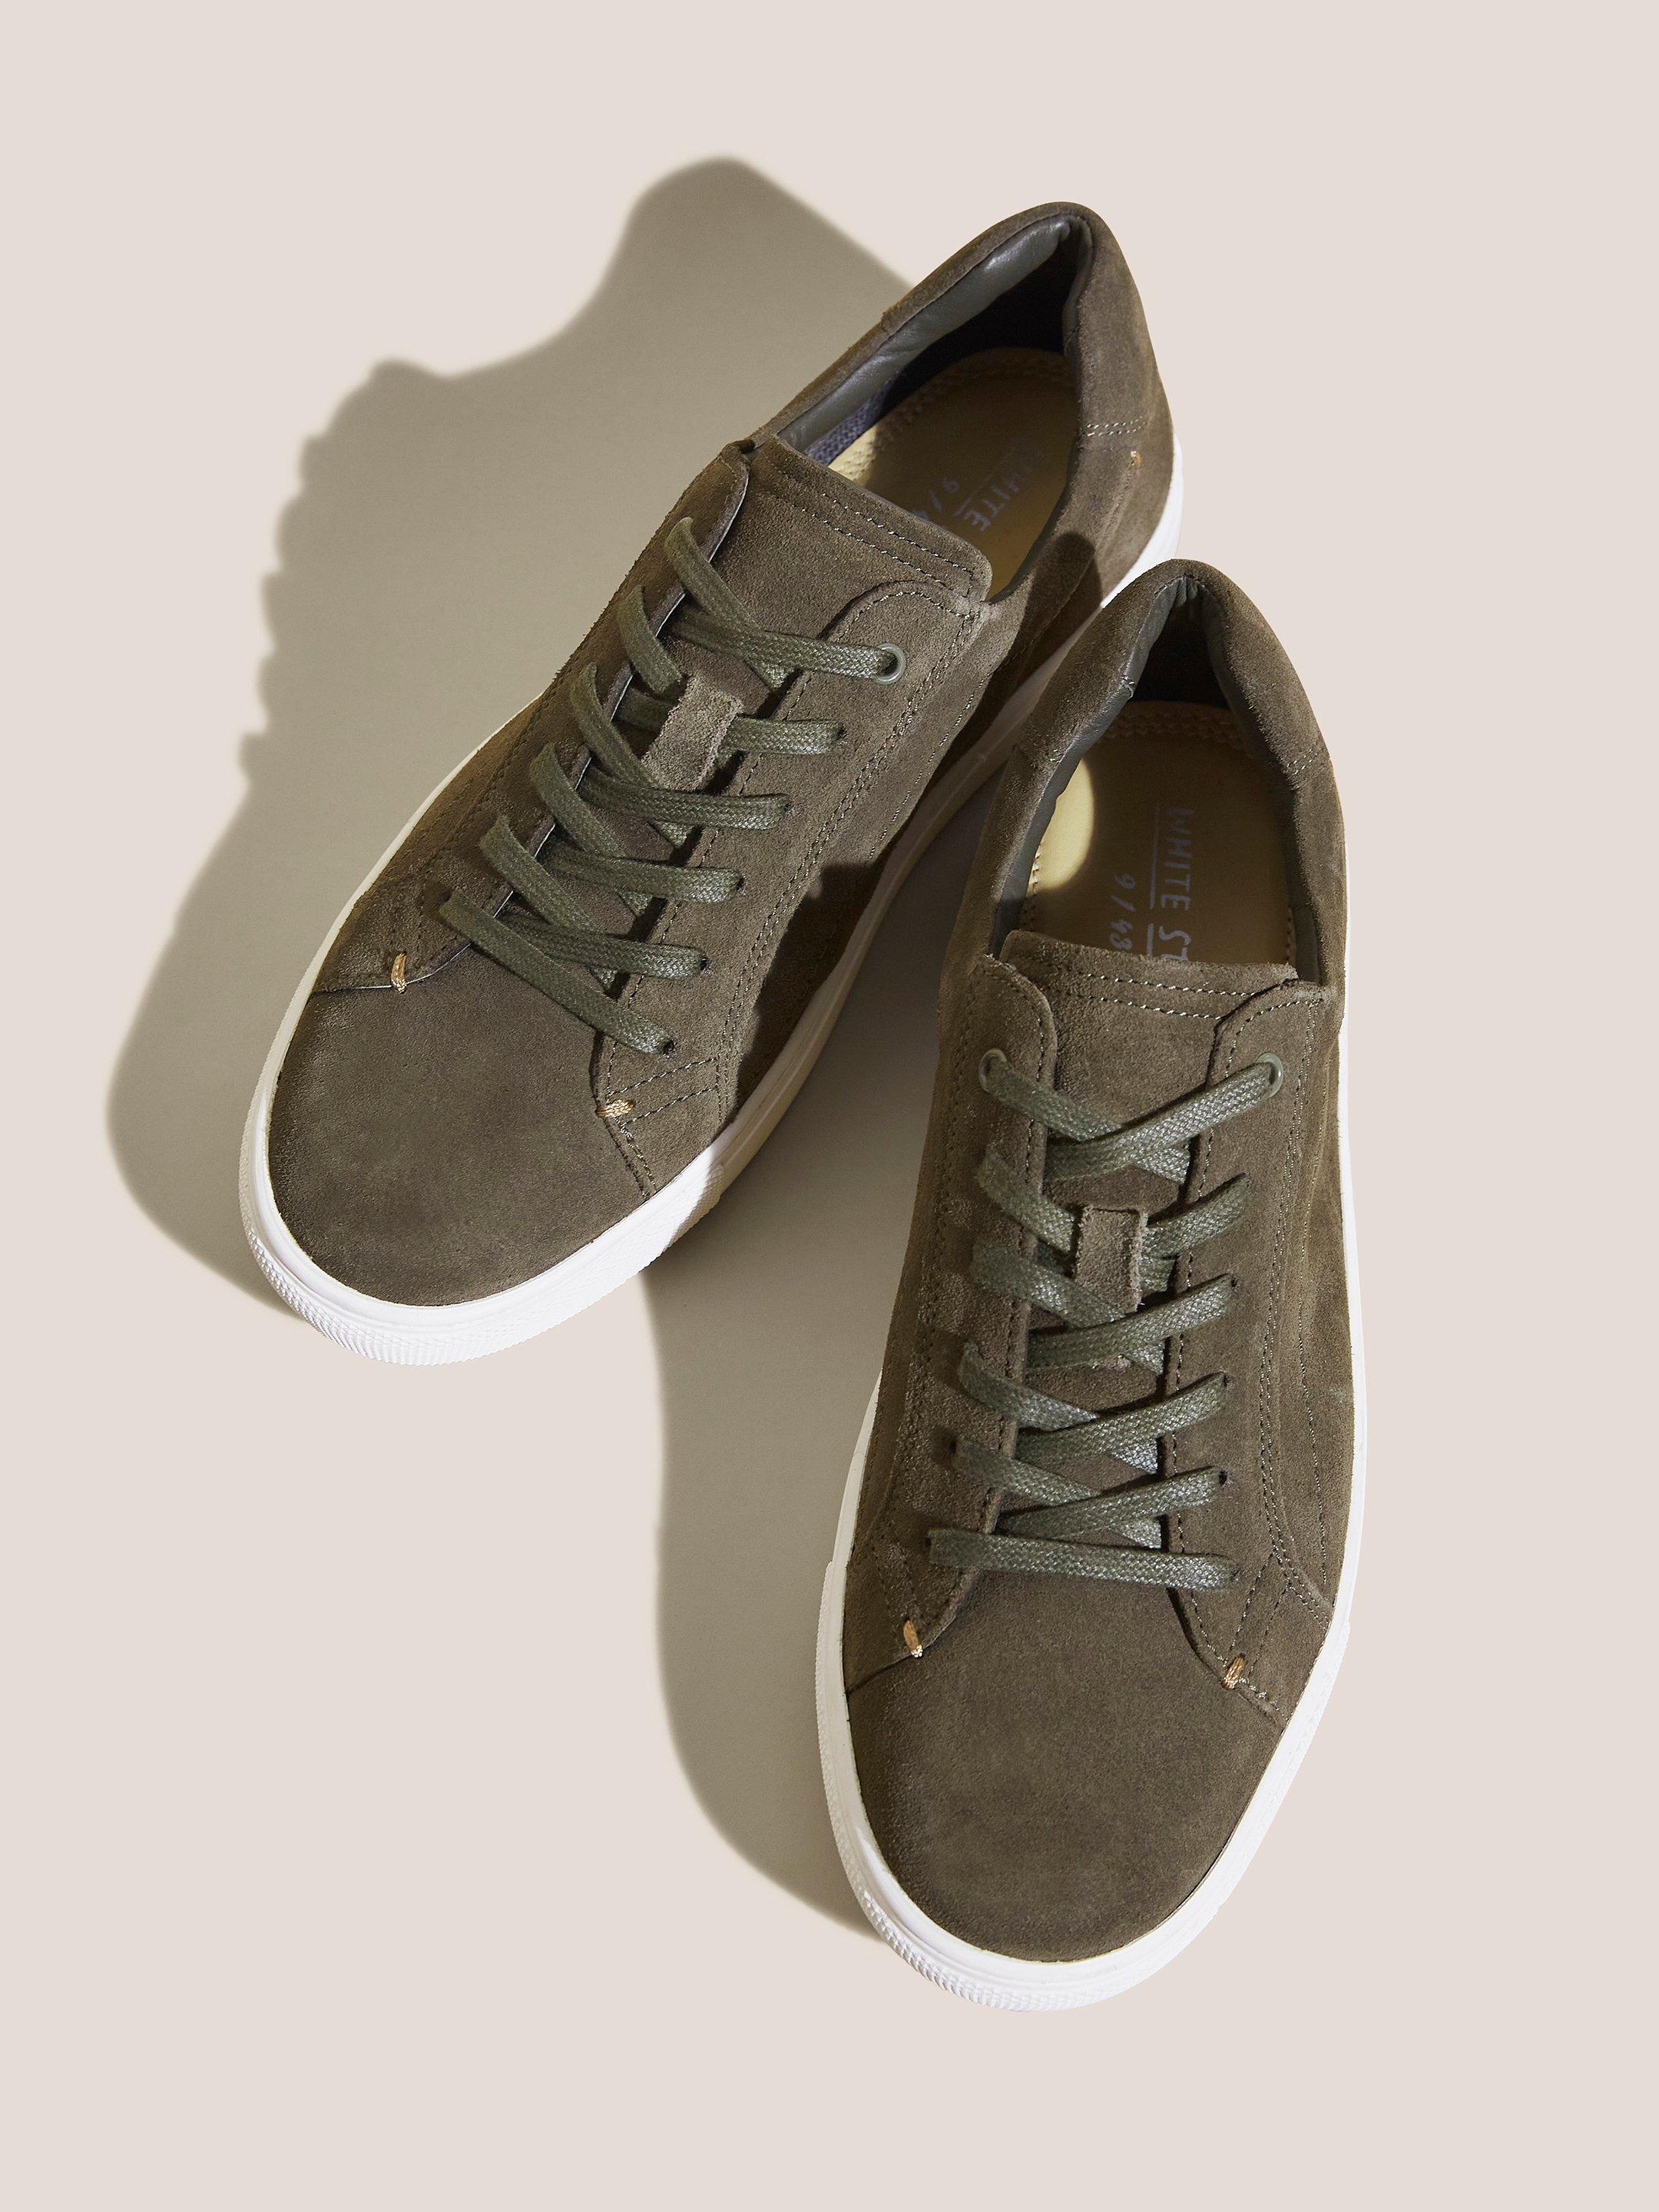 Woody Leather Trainer in KHAKI GRN - FLAT DETAIL